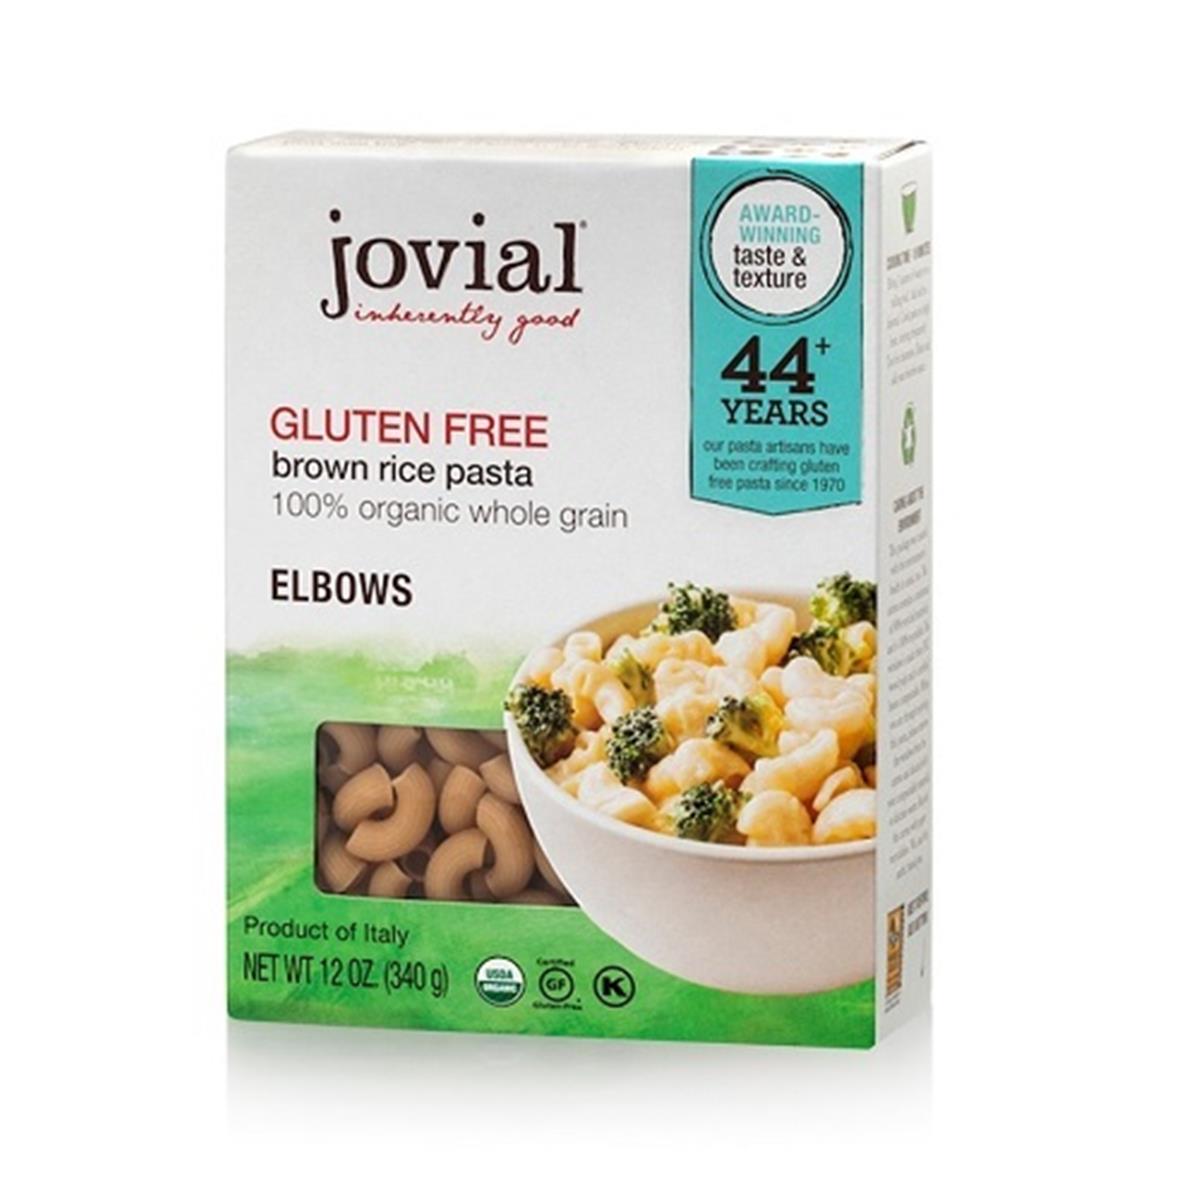 Picture of Jovial BWA89147 12 x 12 oz Gluten Free Brown Rice Pasta Elbows